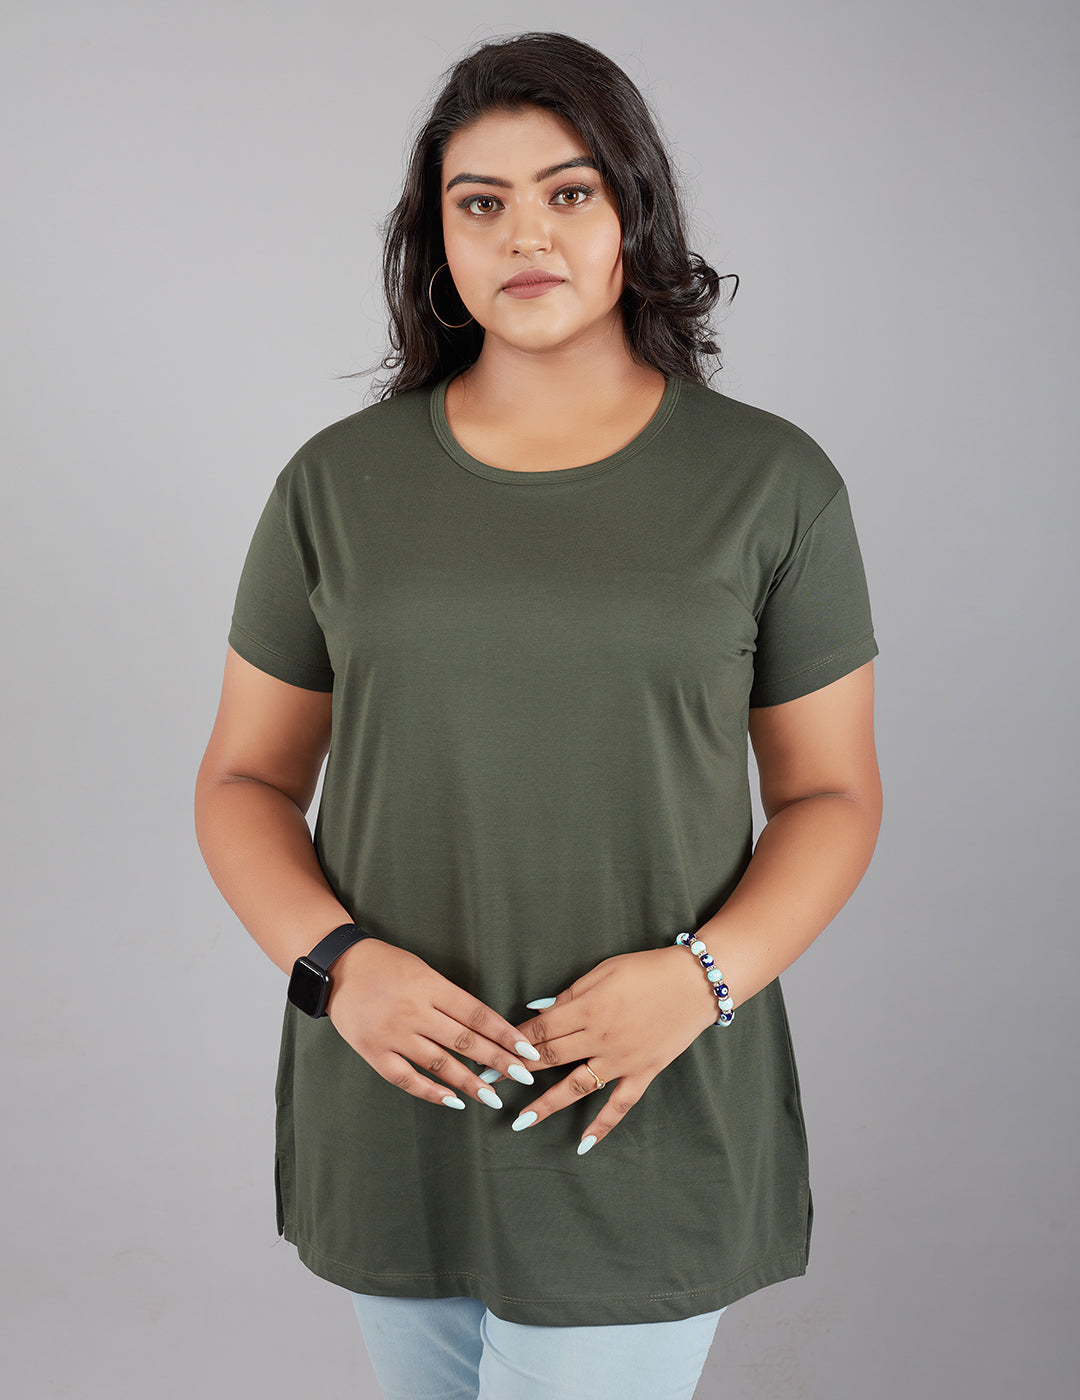 Comfortable Plus Size Plain Cotton Long T-Shirts For Women (Pack Of 2) Online In India